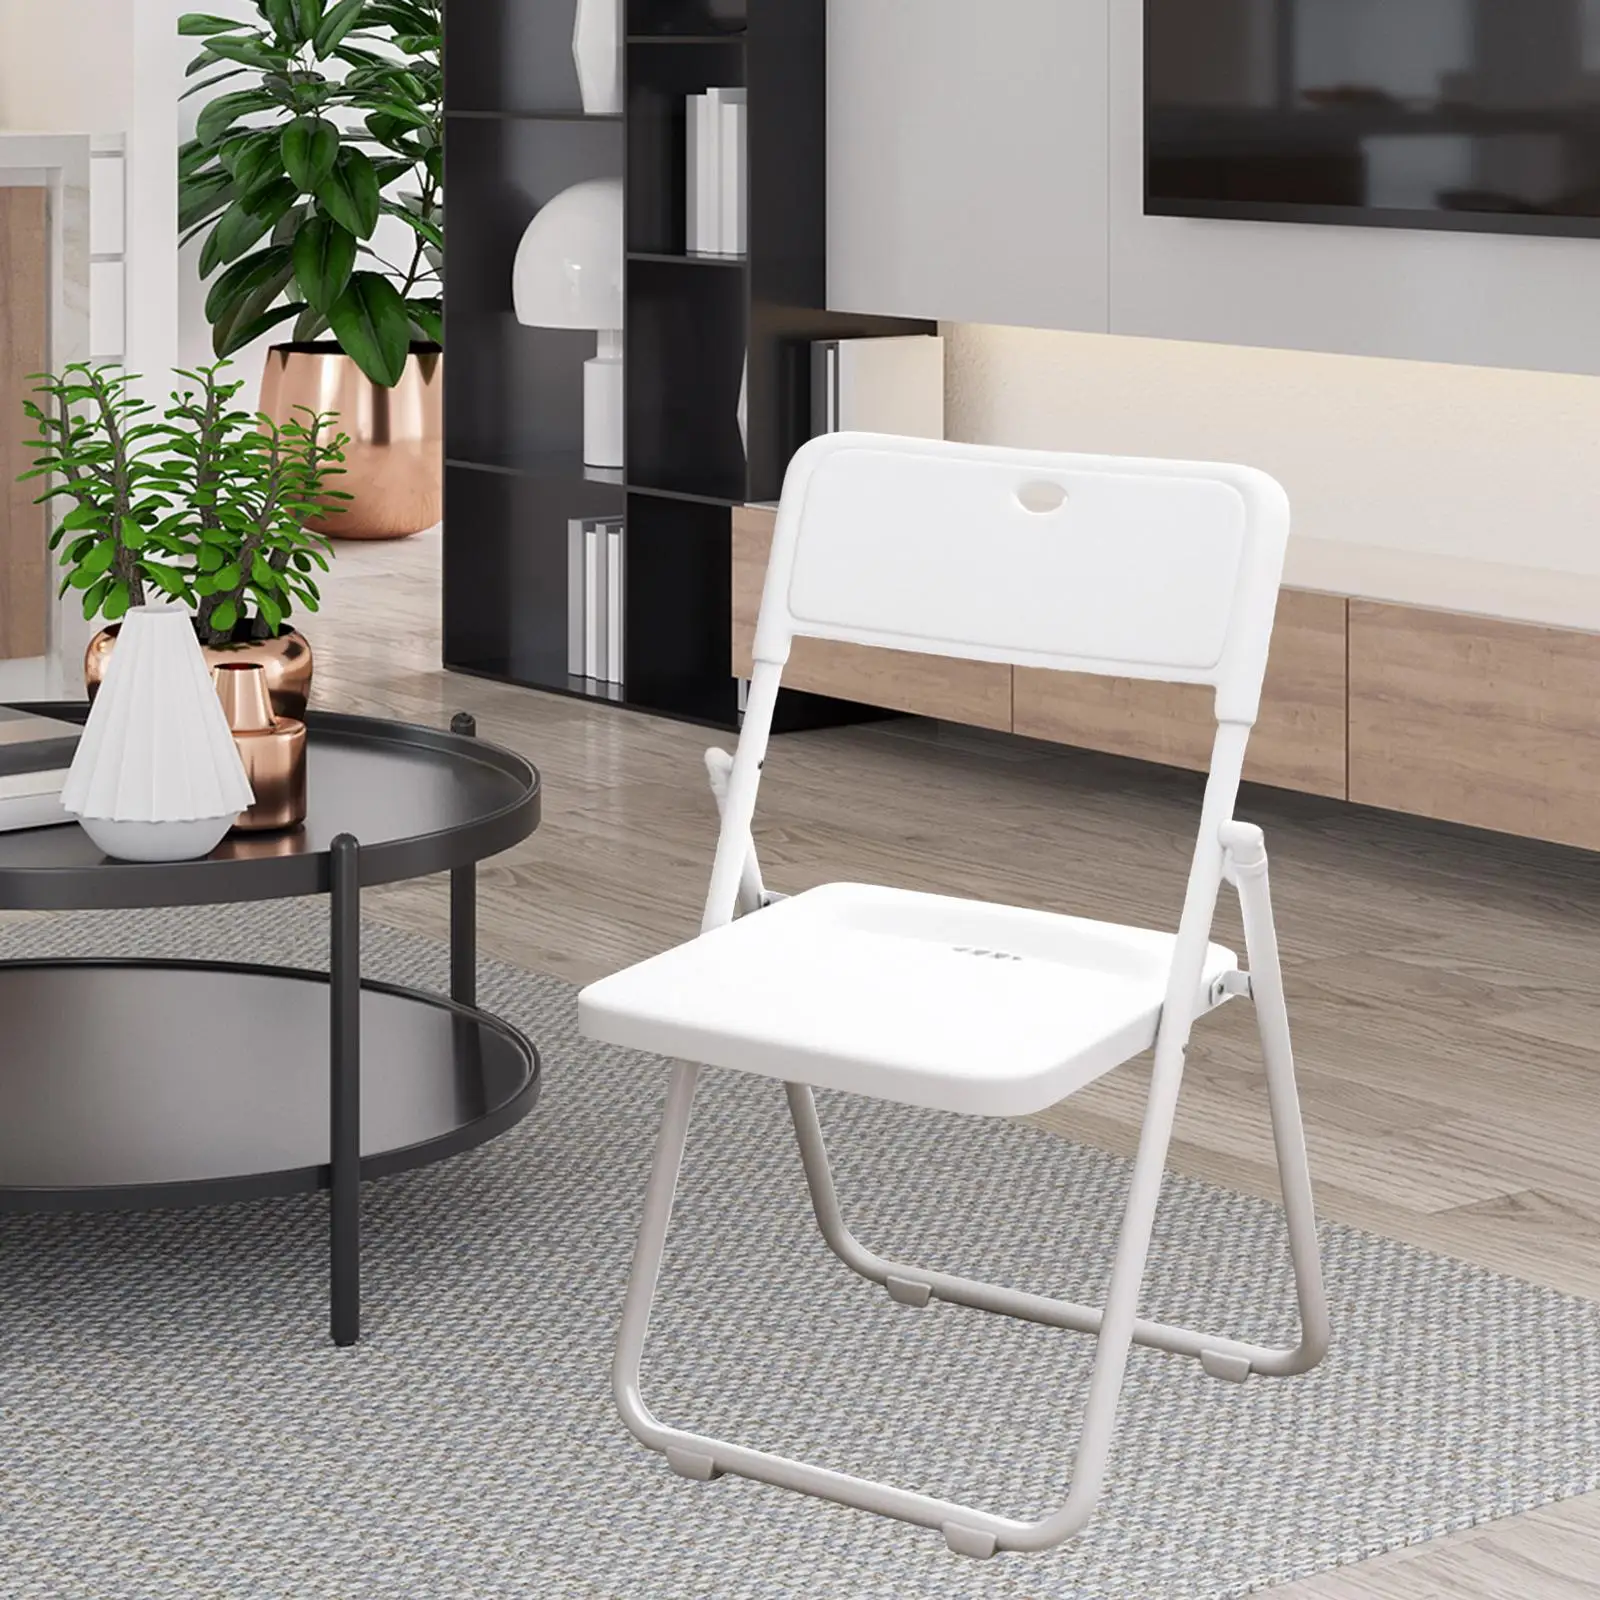 Acrylic Folding Chair Furniture Photo Chair for Dining Room office